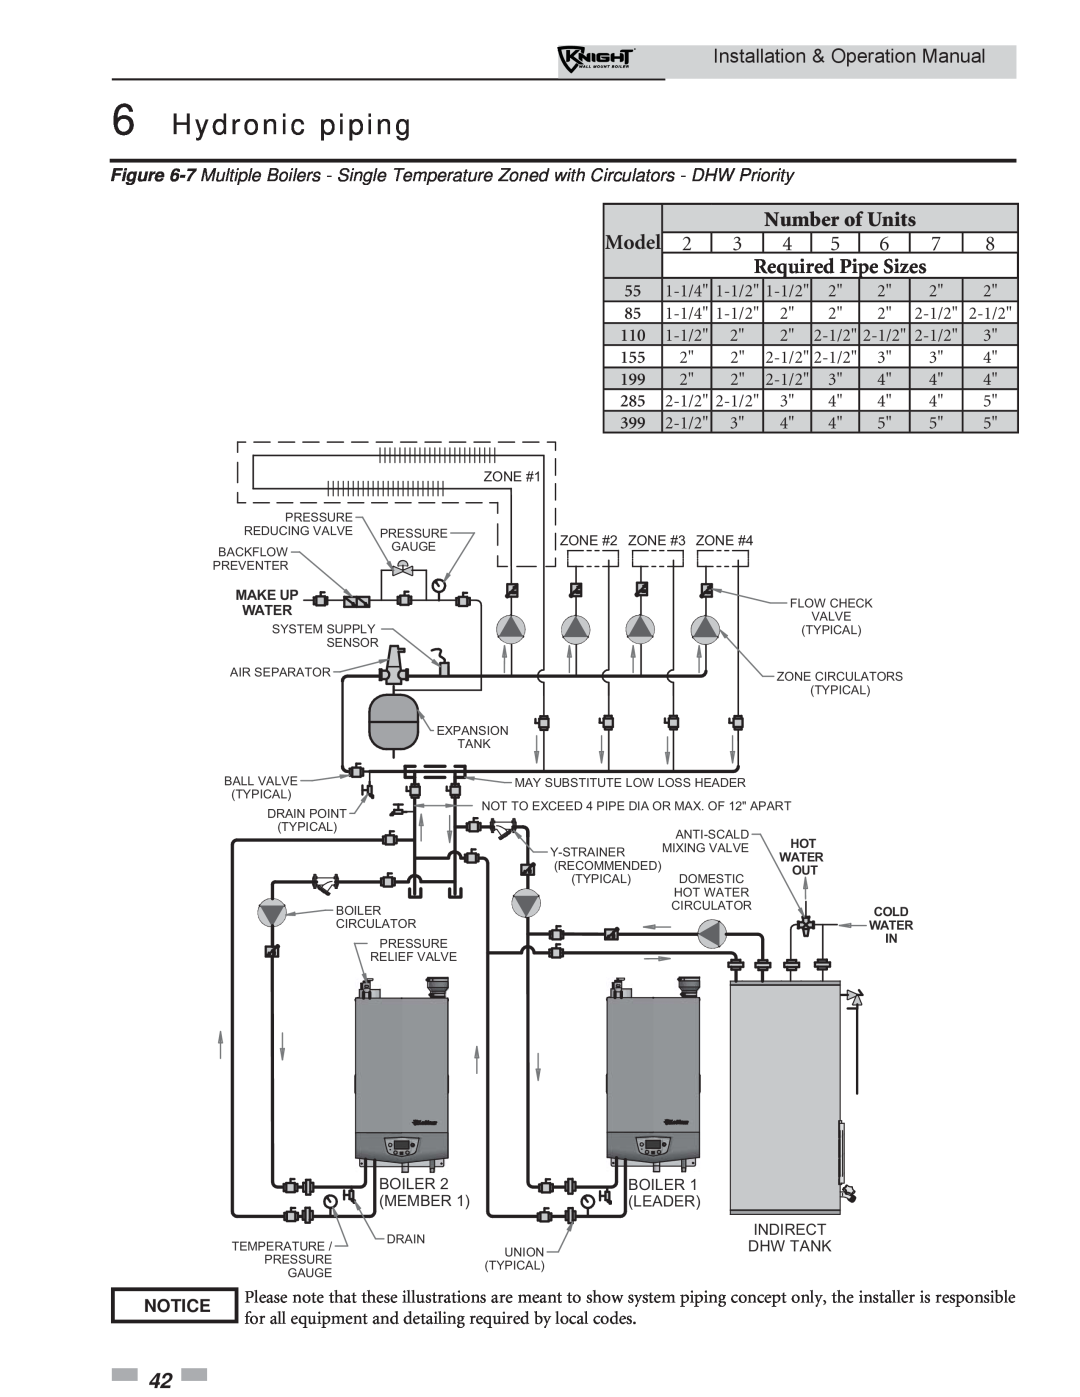 Lochinvar WH 55-399 operation manual Hydronic piping, Number of Units, Required Pipe Sizes, Model, Notice 